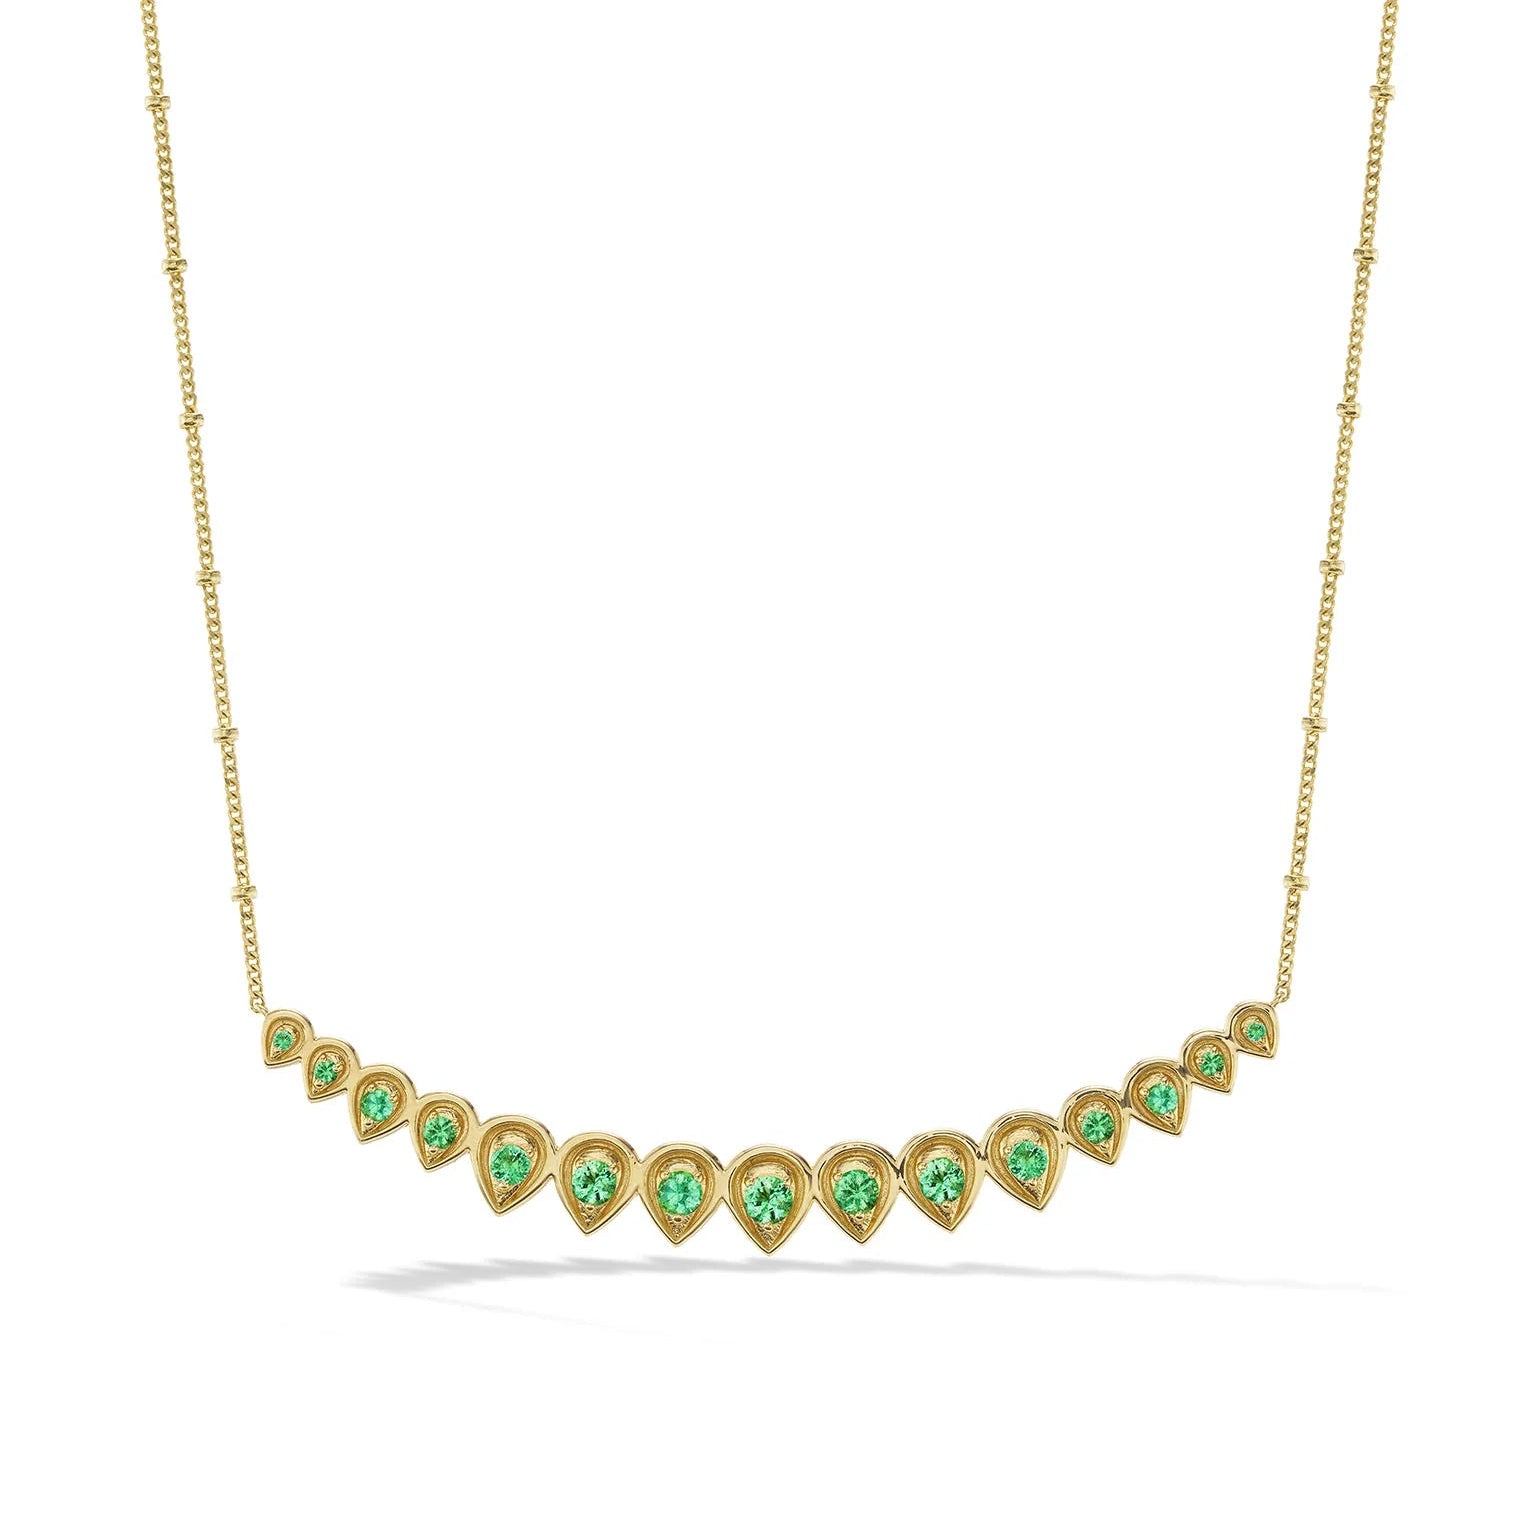 Orly Marcel Mandala Petal Graduated Necklace with Emerald - Be On Park